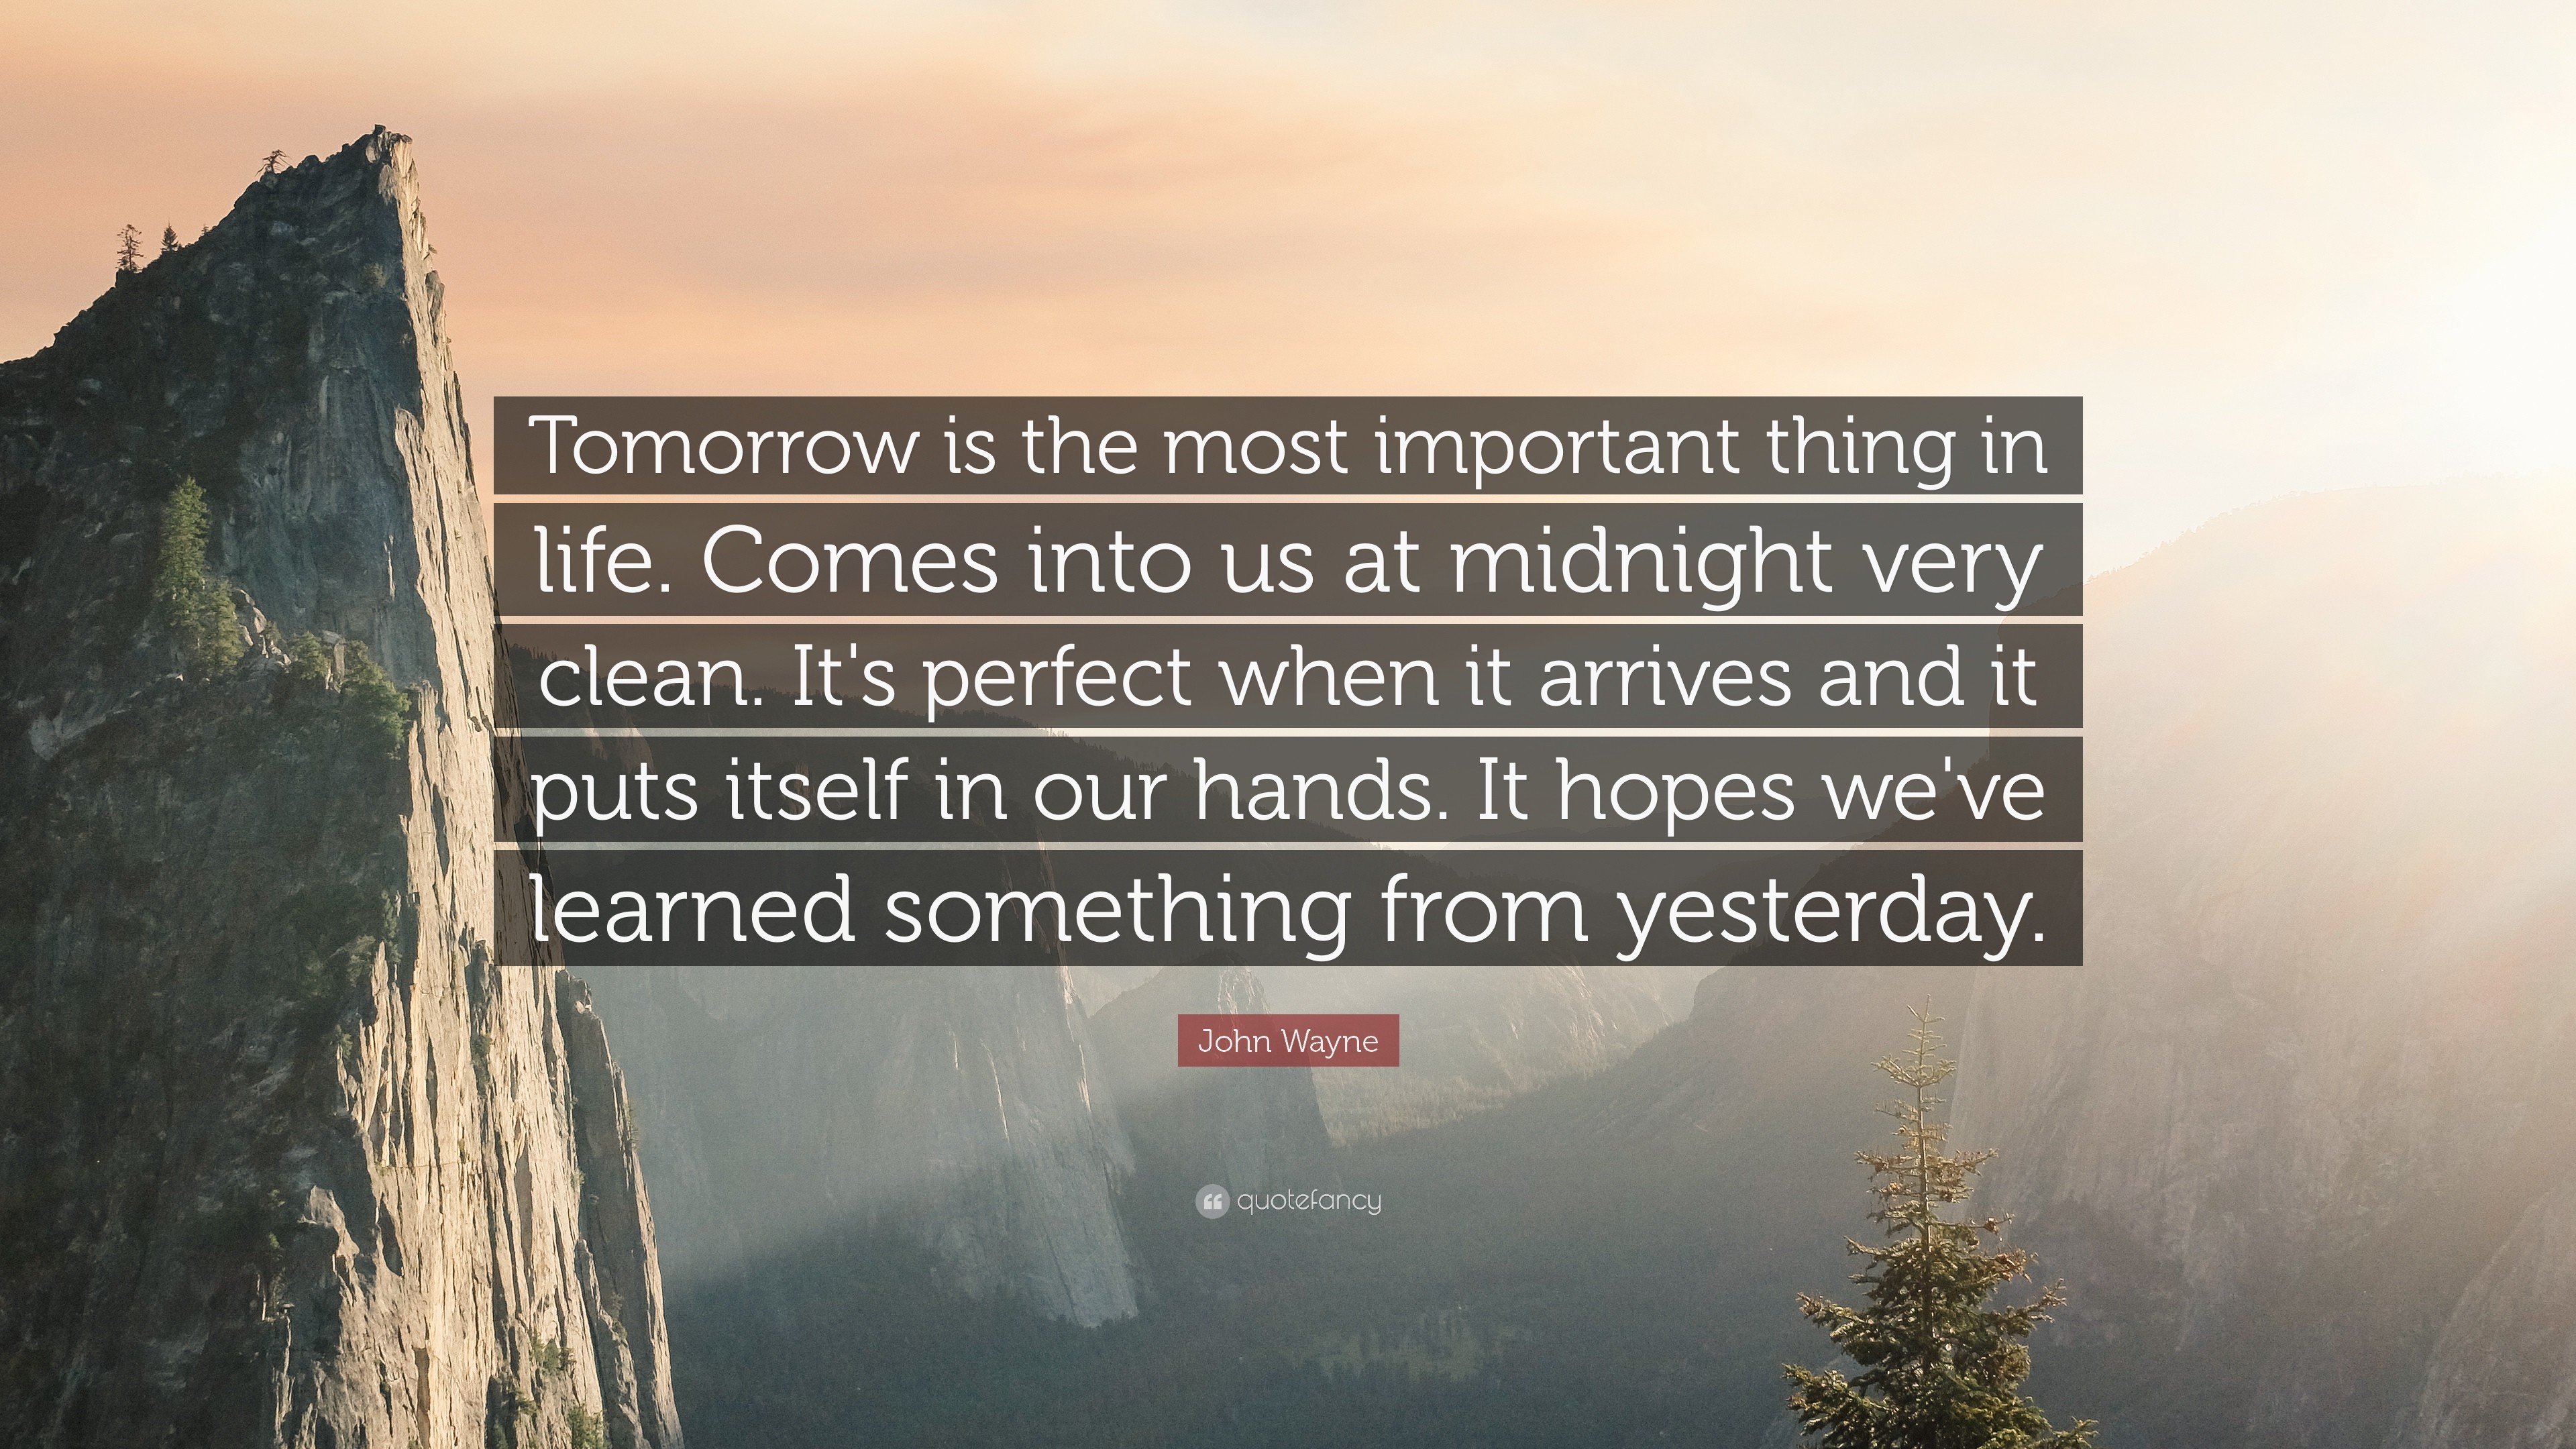 3840x2160 John Wayne Quote: “Tomorrow is the most important thing in life. Comes into